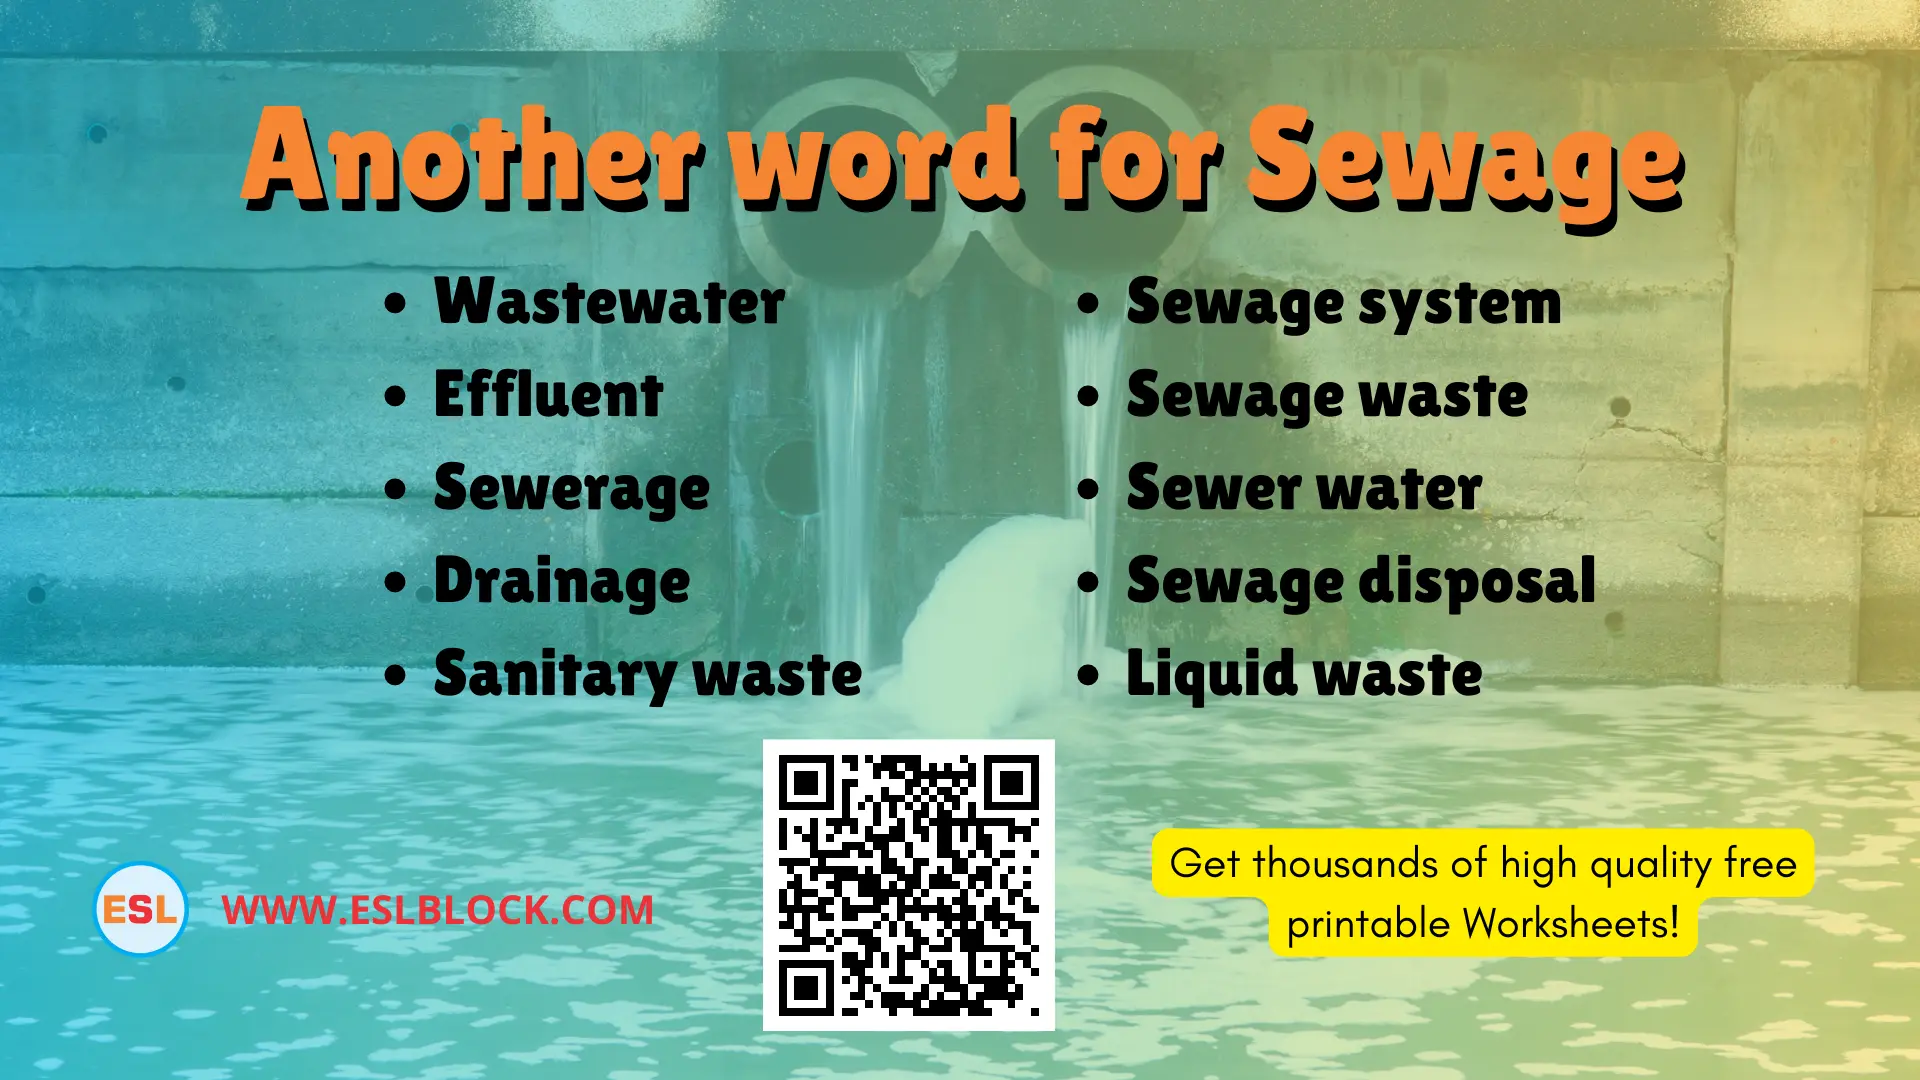 What is another word for Sewage